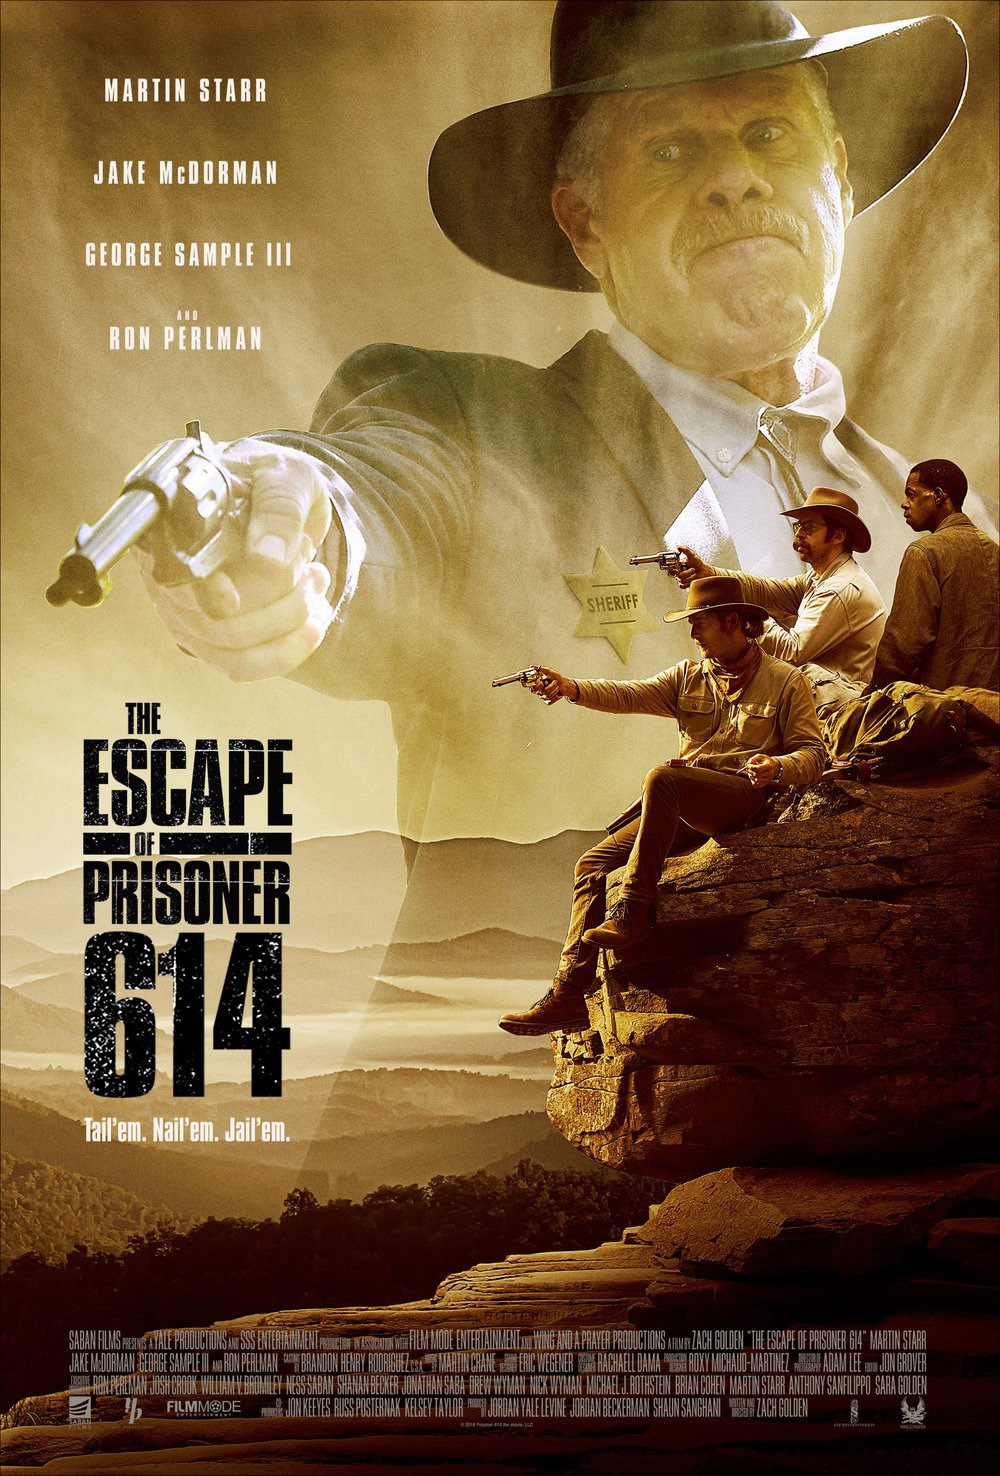 Extra Large Movie Poster Image for The Escape of Prisoner 614 